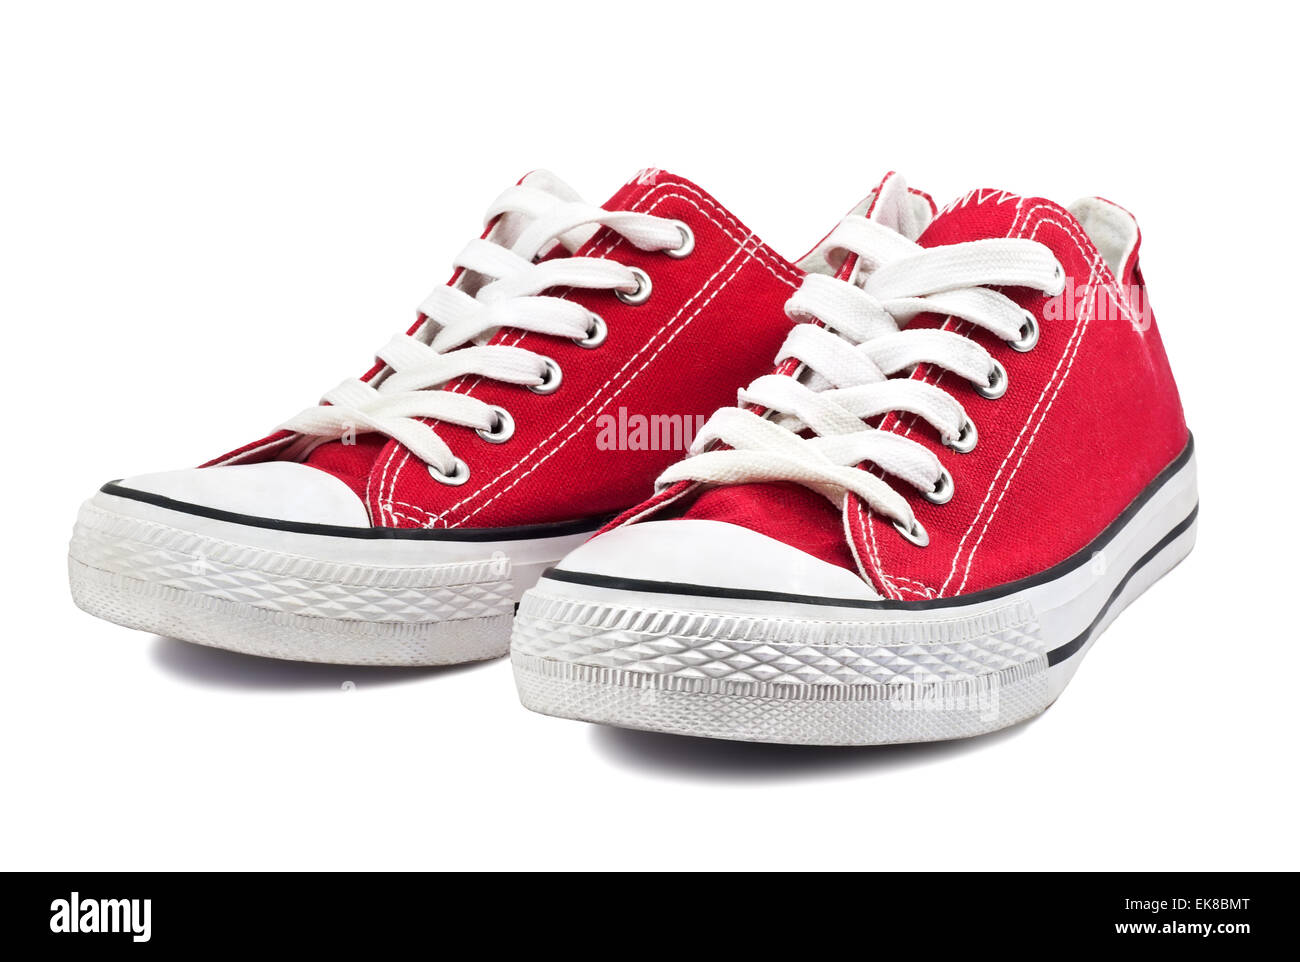 vintage red shoes Stock Photo